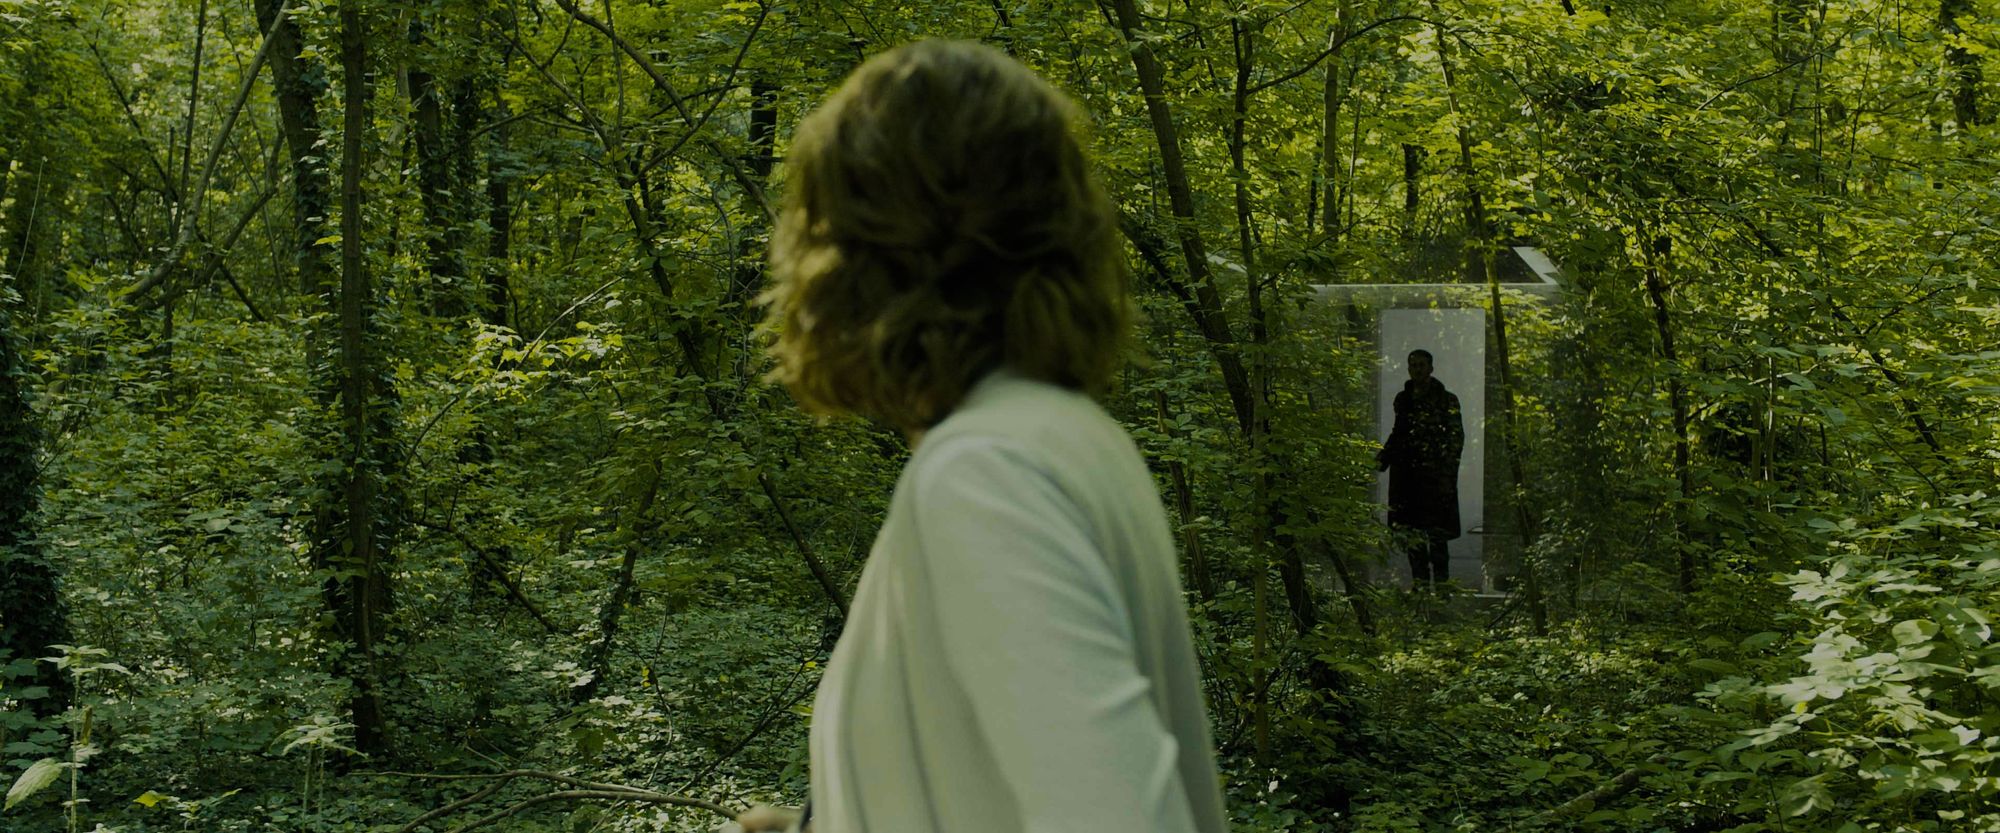 Man entering a forest via door, woman looking at him 